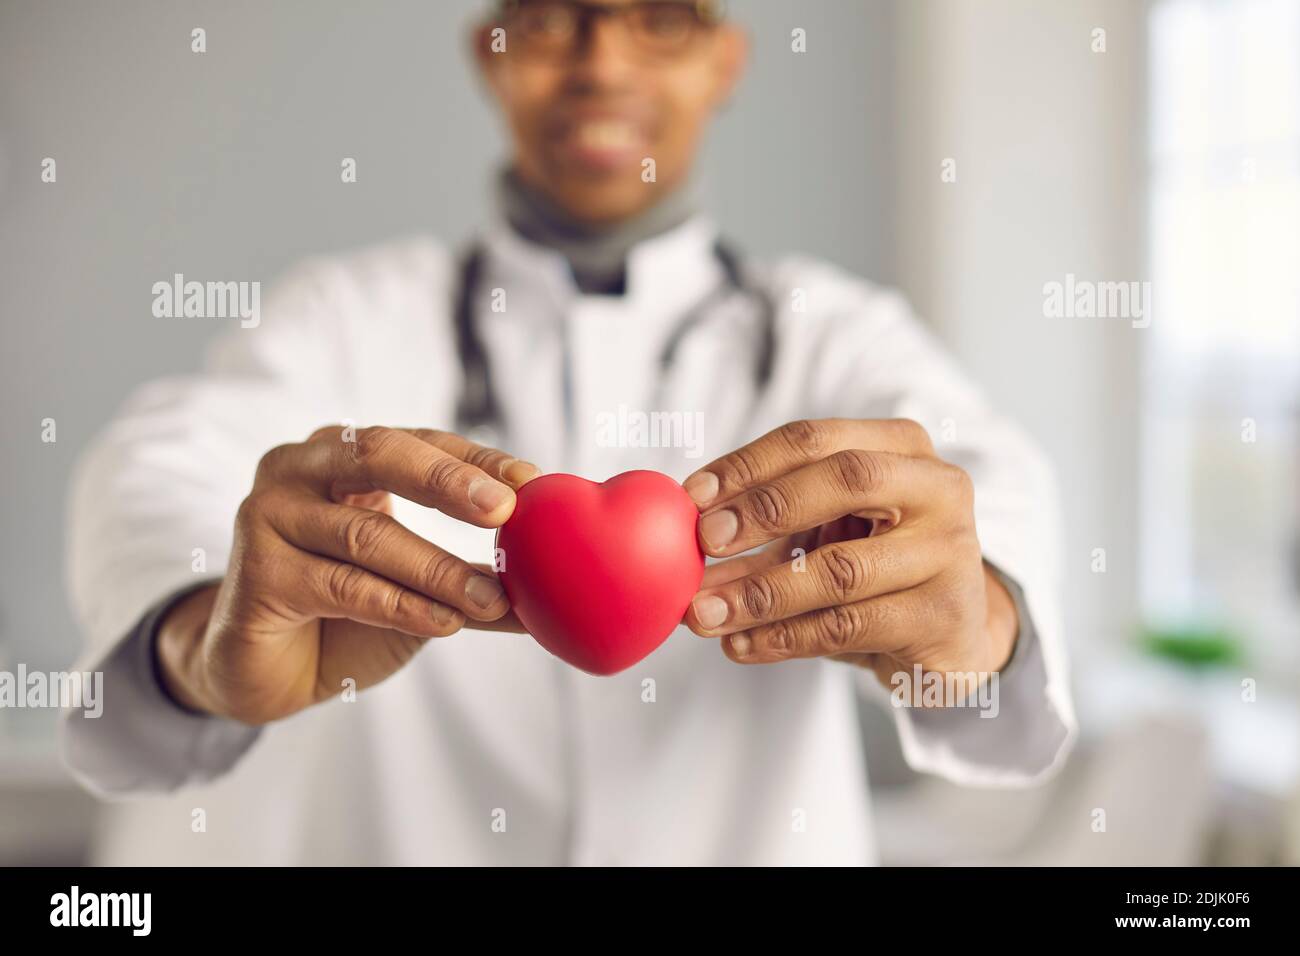 Doctor holding red heart and promoting healthy lifestyle and prevention of heart diseases Stock Photo